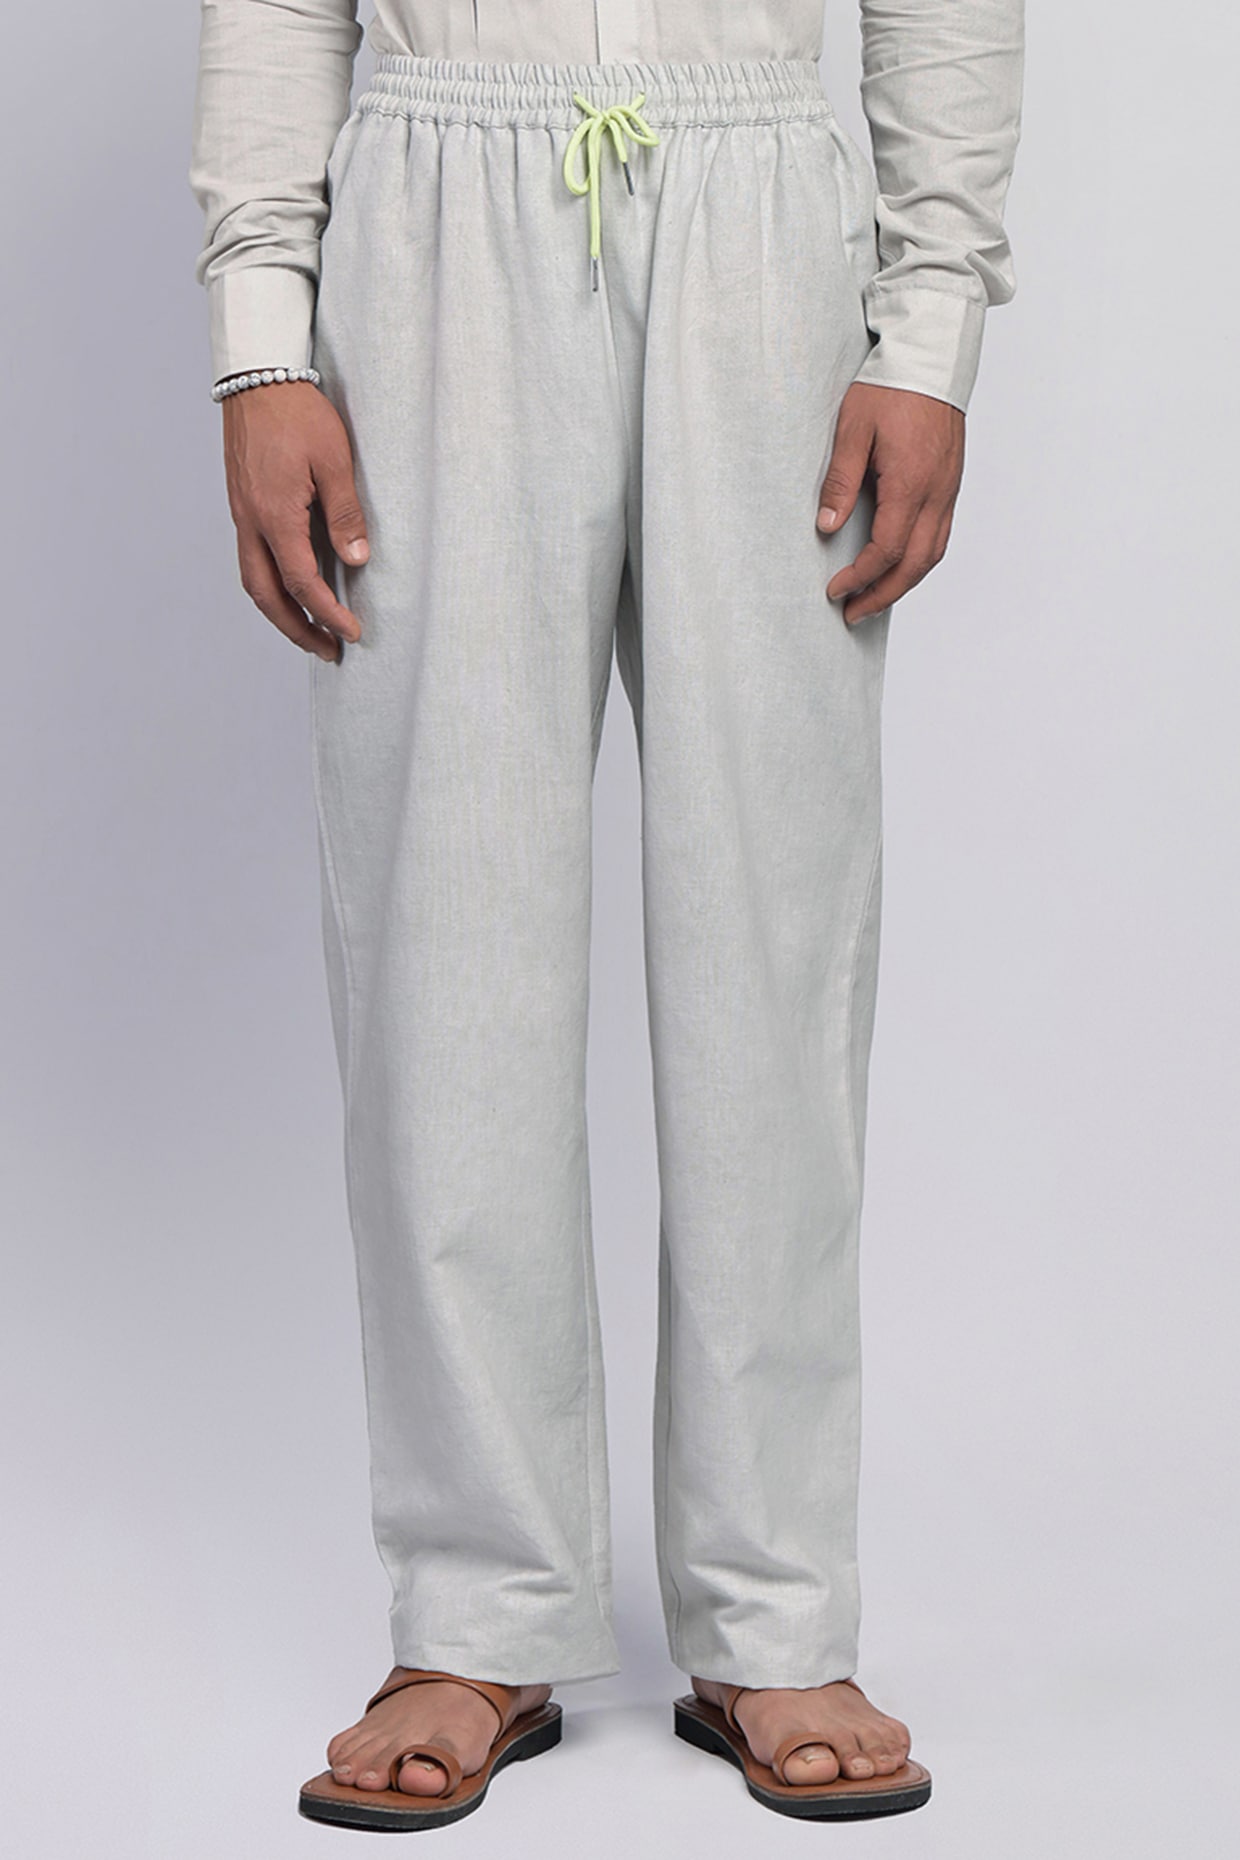 Shop Glen Plaid Pants for Men from latest collection at Forever 21  397317